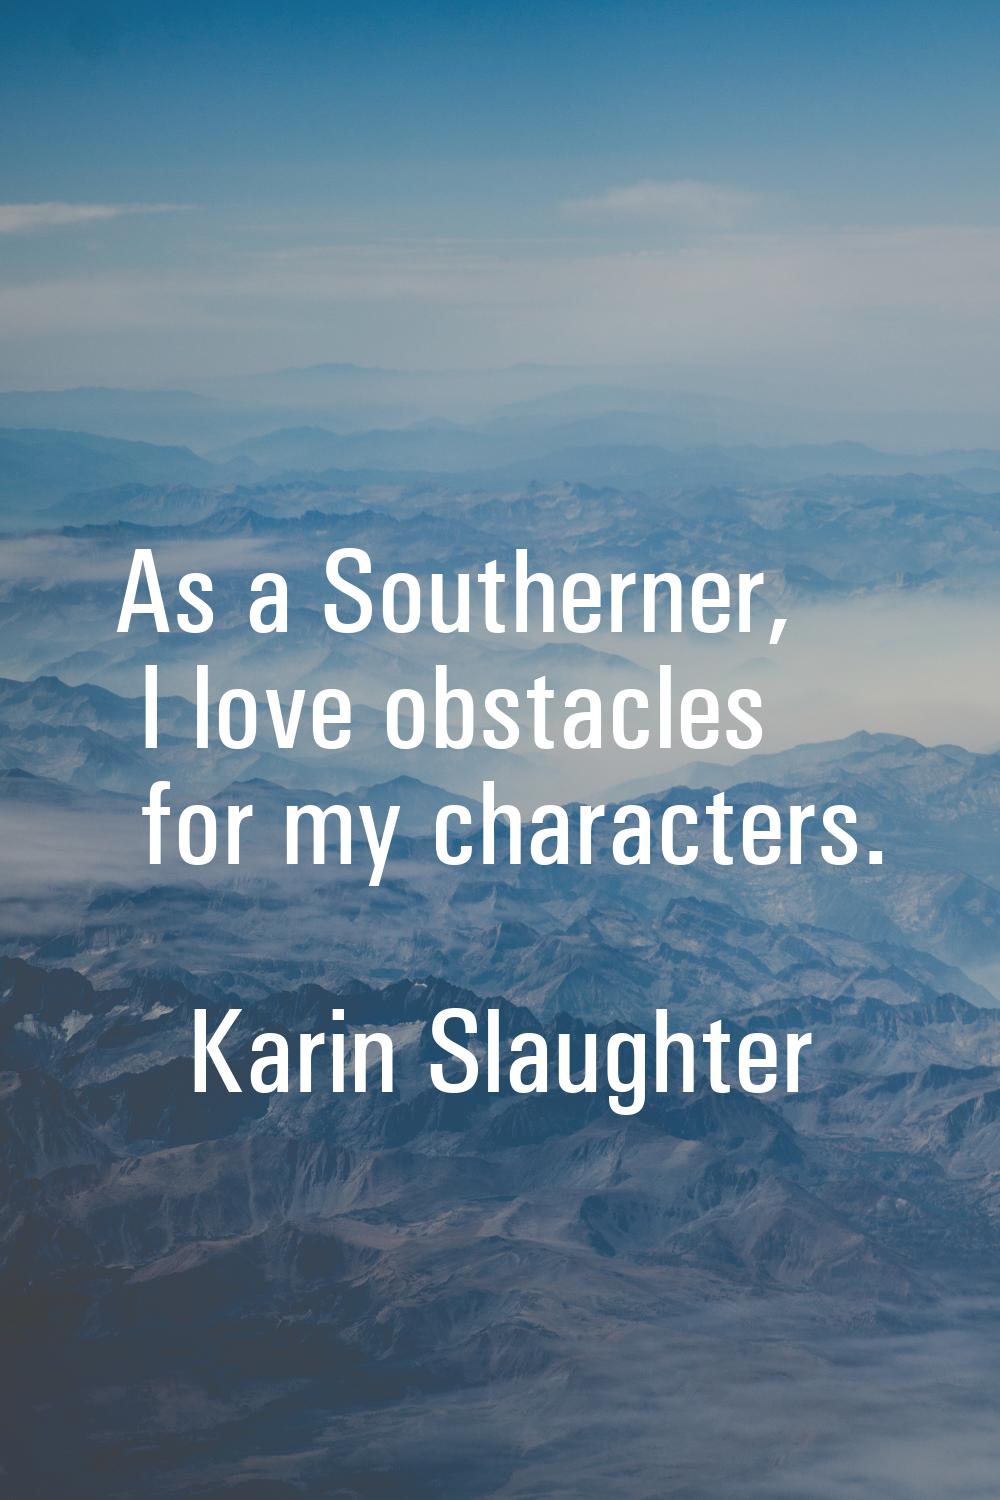 As a Southerner, I love obstacles for my characters.